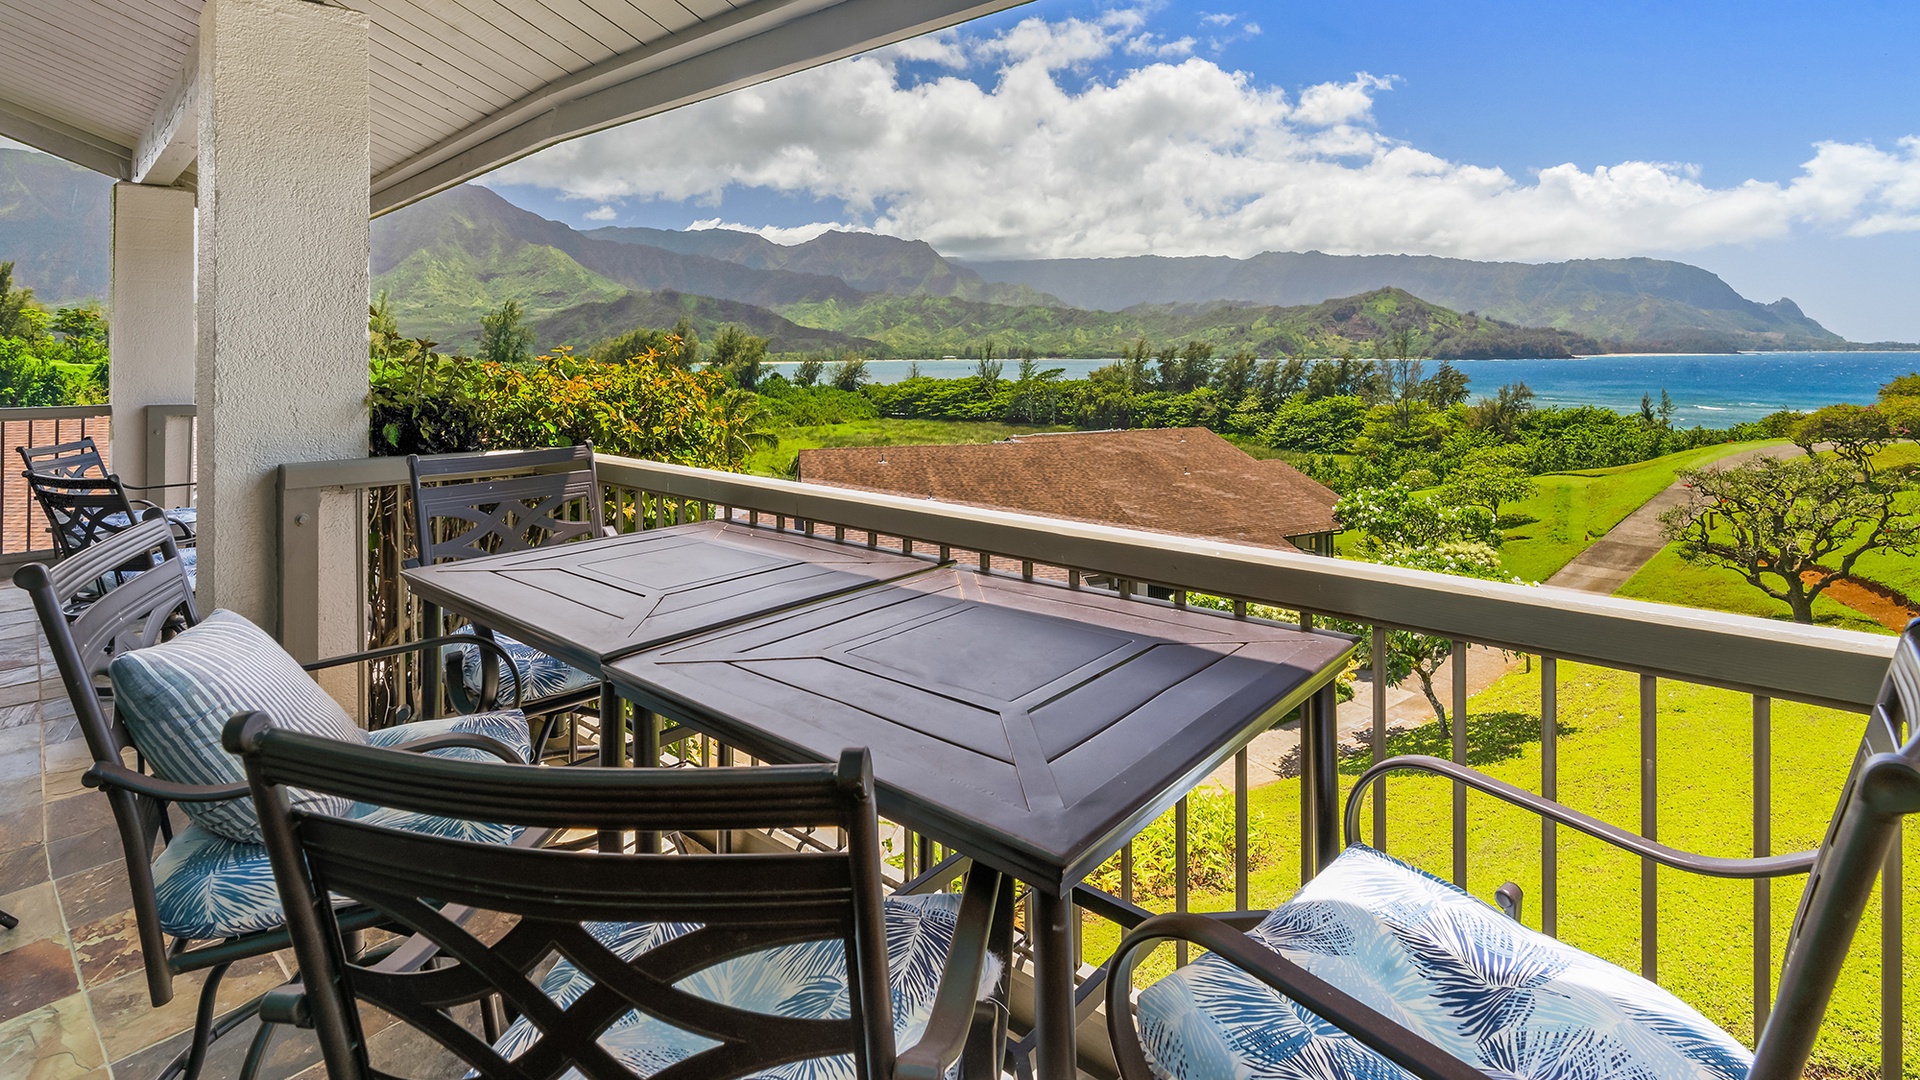 The view from Hanalei Bay Resort #4321 & #4322